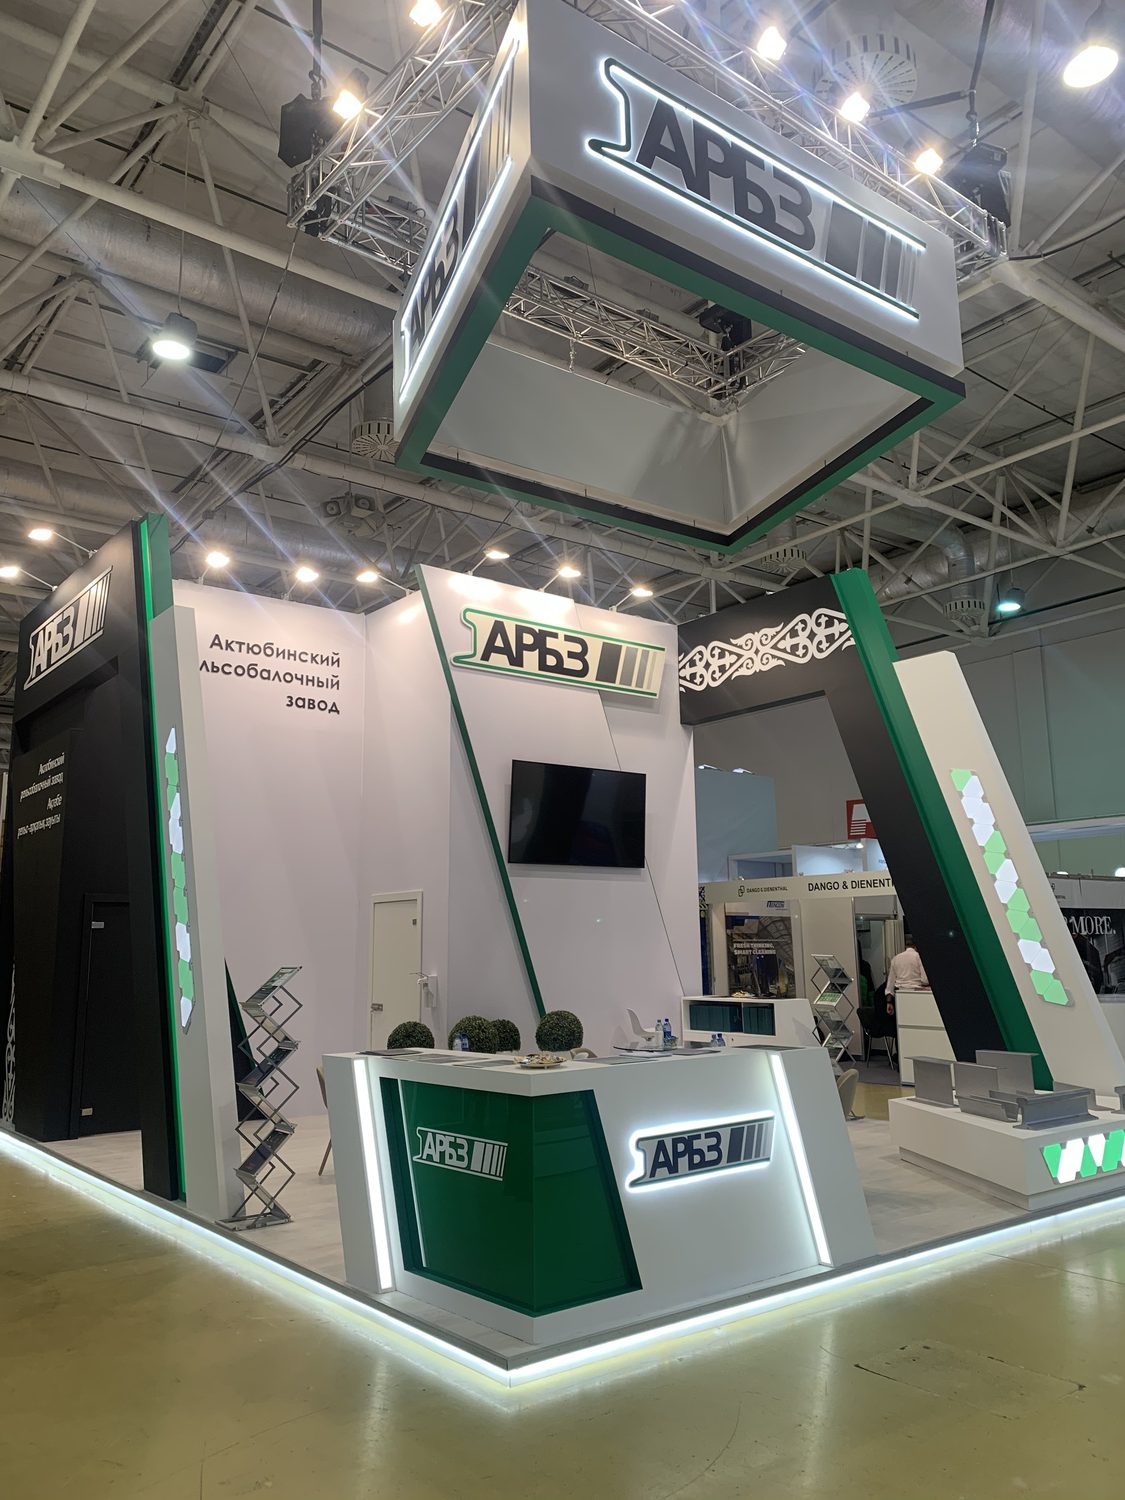 Aktobe Rail and Section Works LLP participates in the 27th International Industrial Exhibition “Metal-Expo 2021”